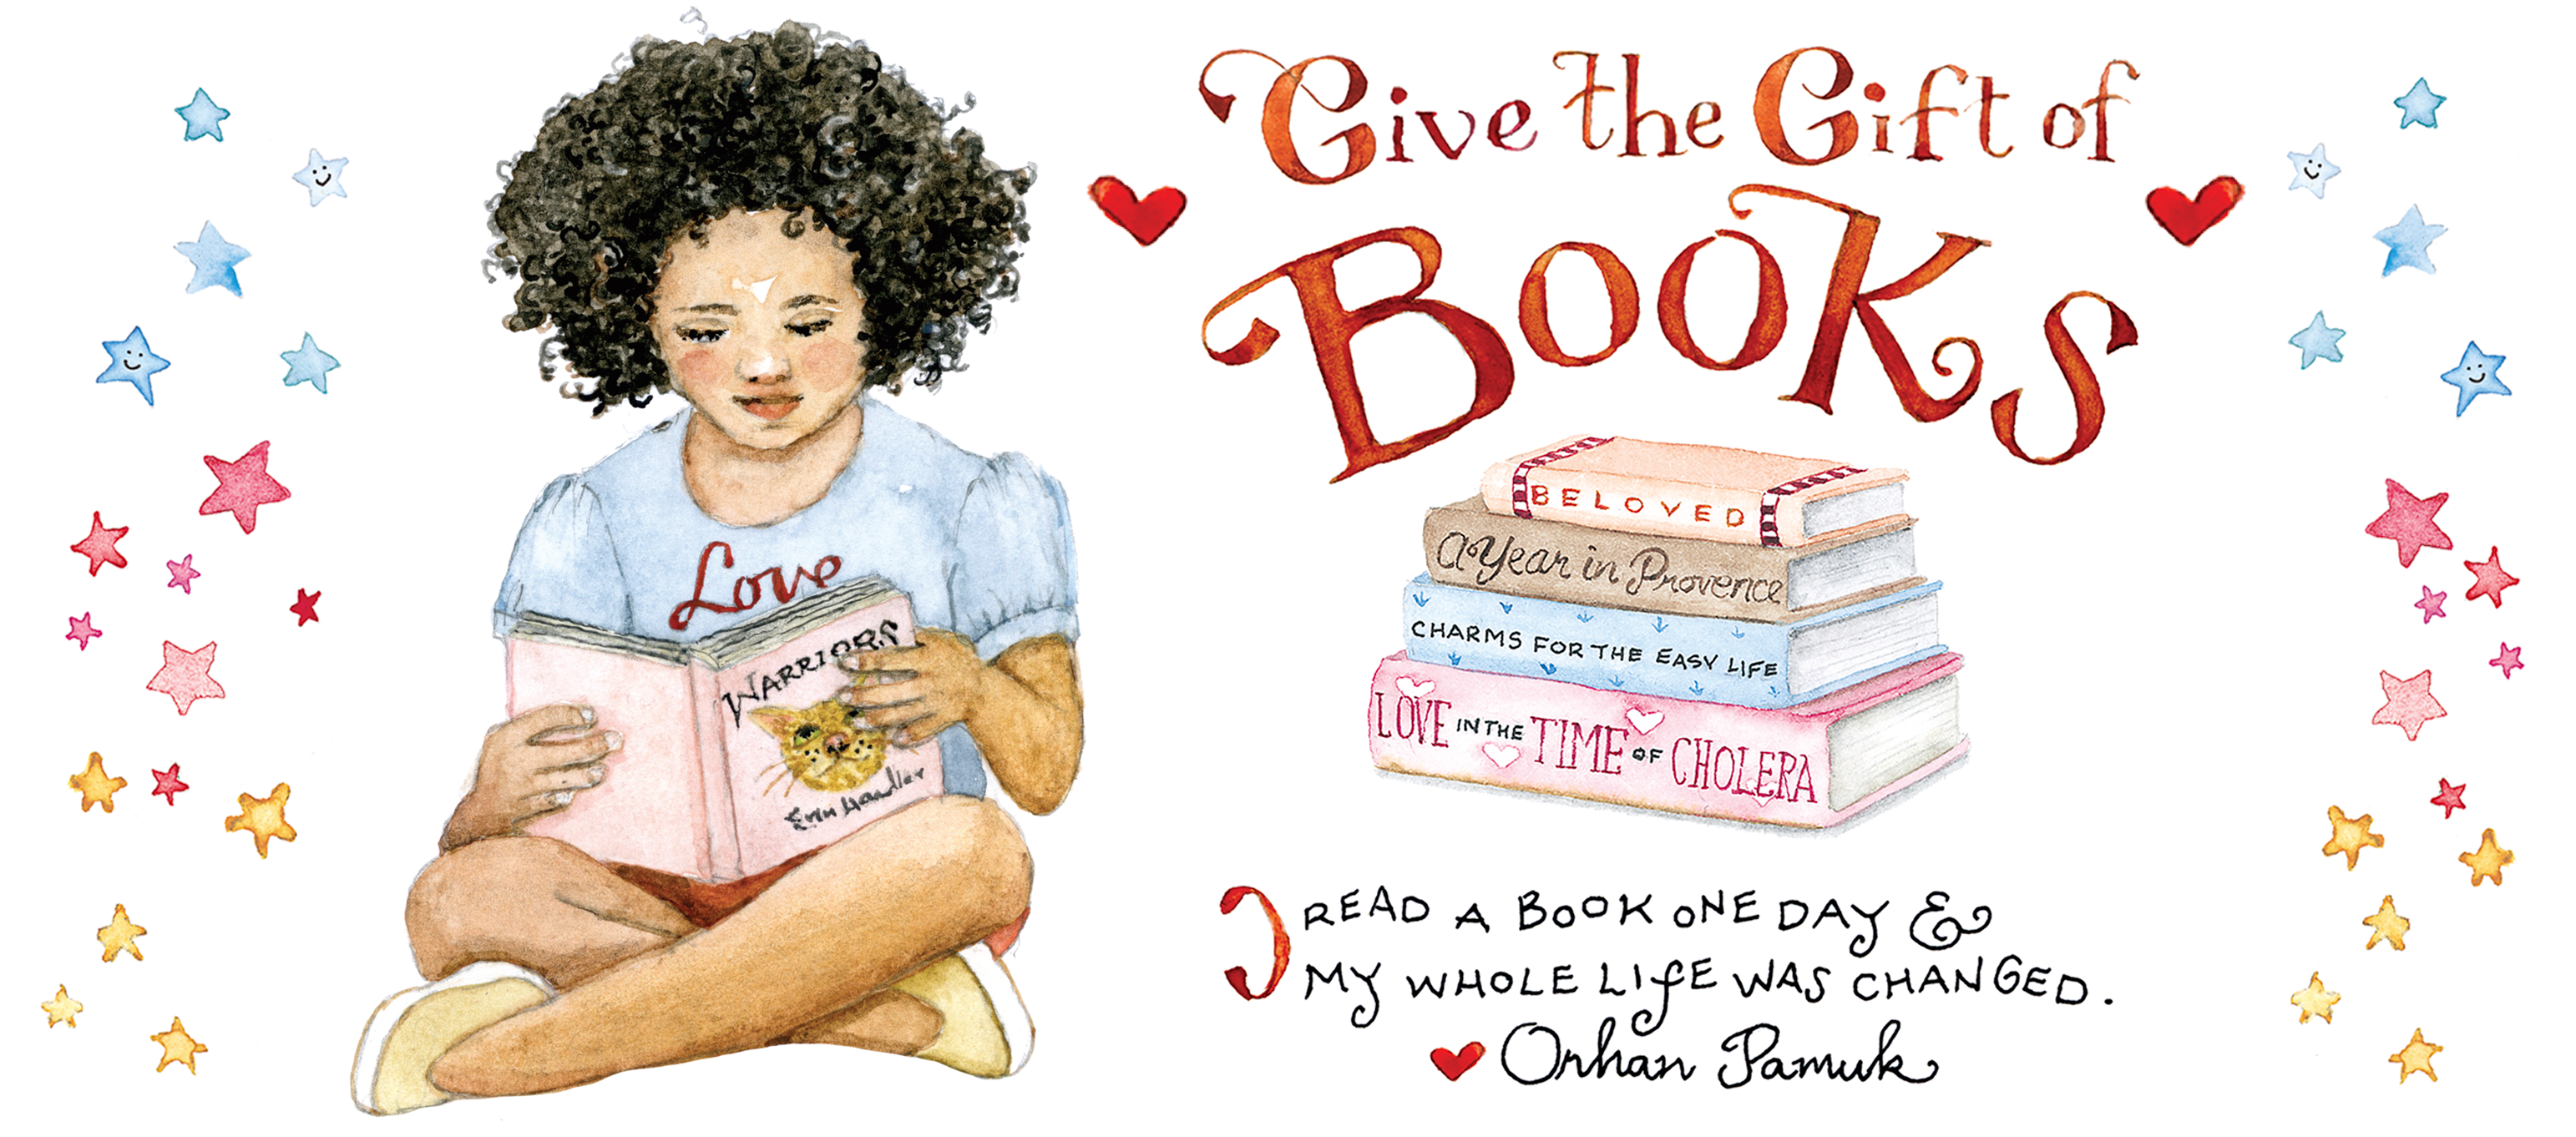 Give the gift of books